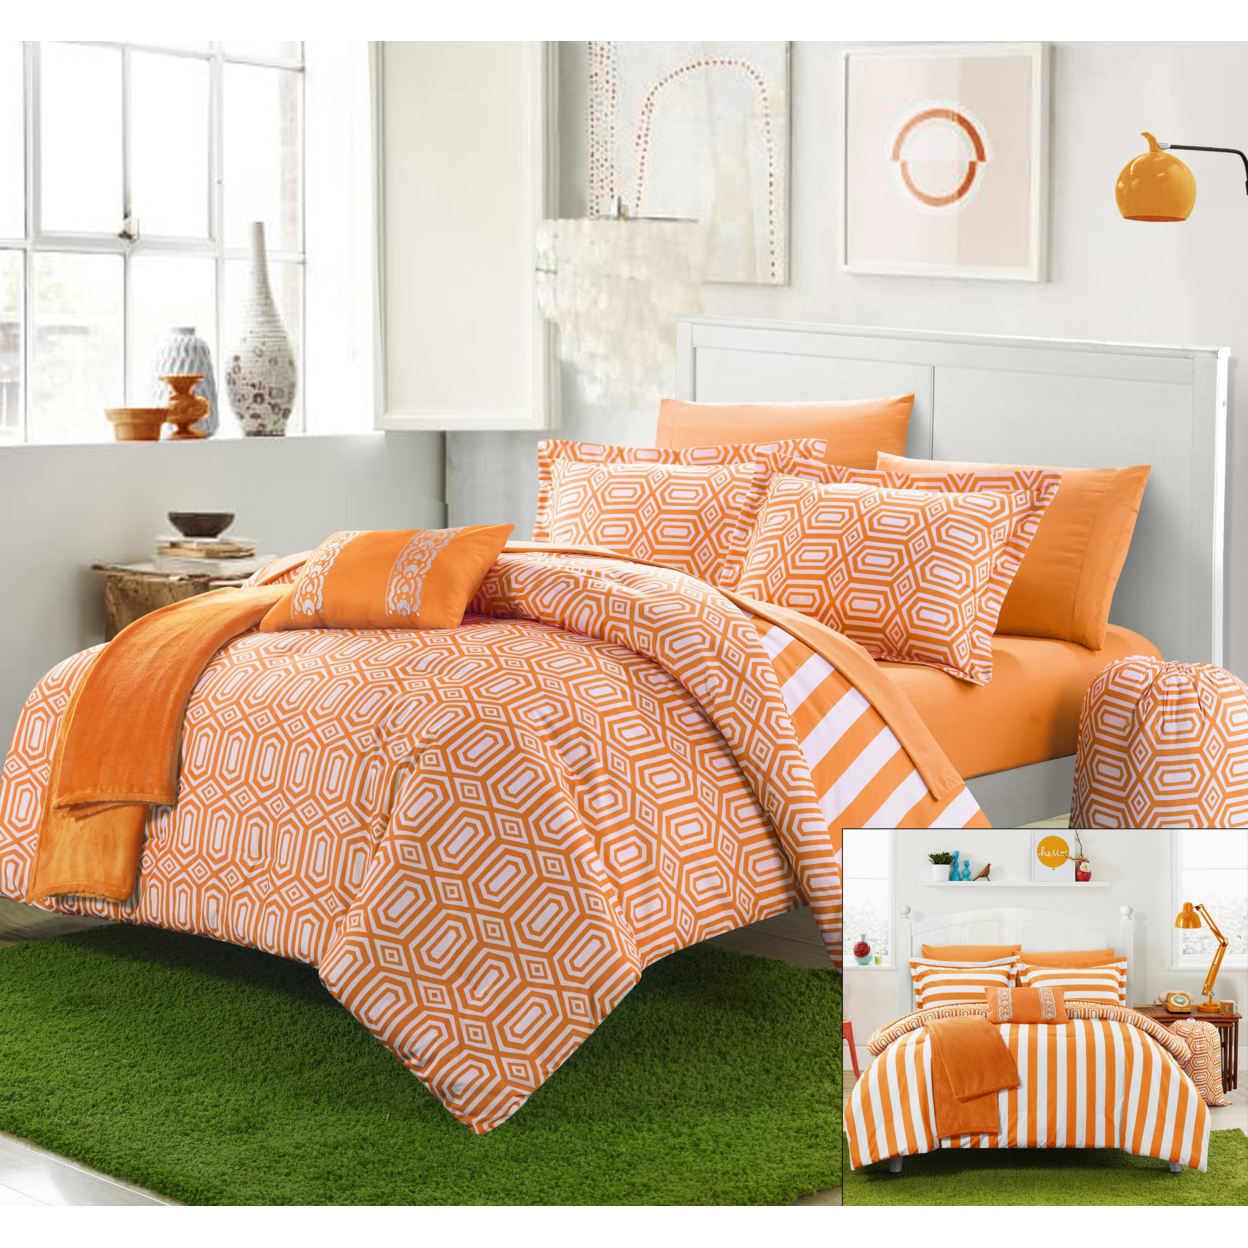 Chic Home 8/10 Piece Lyon Geometric And Striped Printed REVERSIBLE Comforter Set, Includes Sheets, Duffle Hamper And Fleece Throw - Orange,